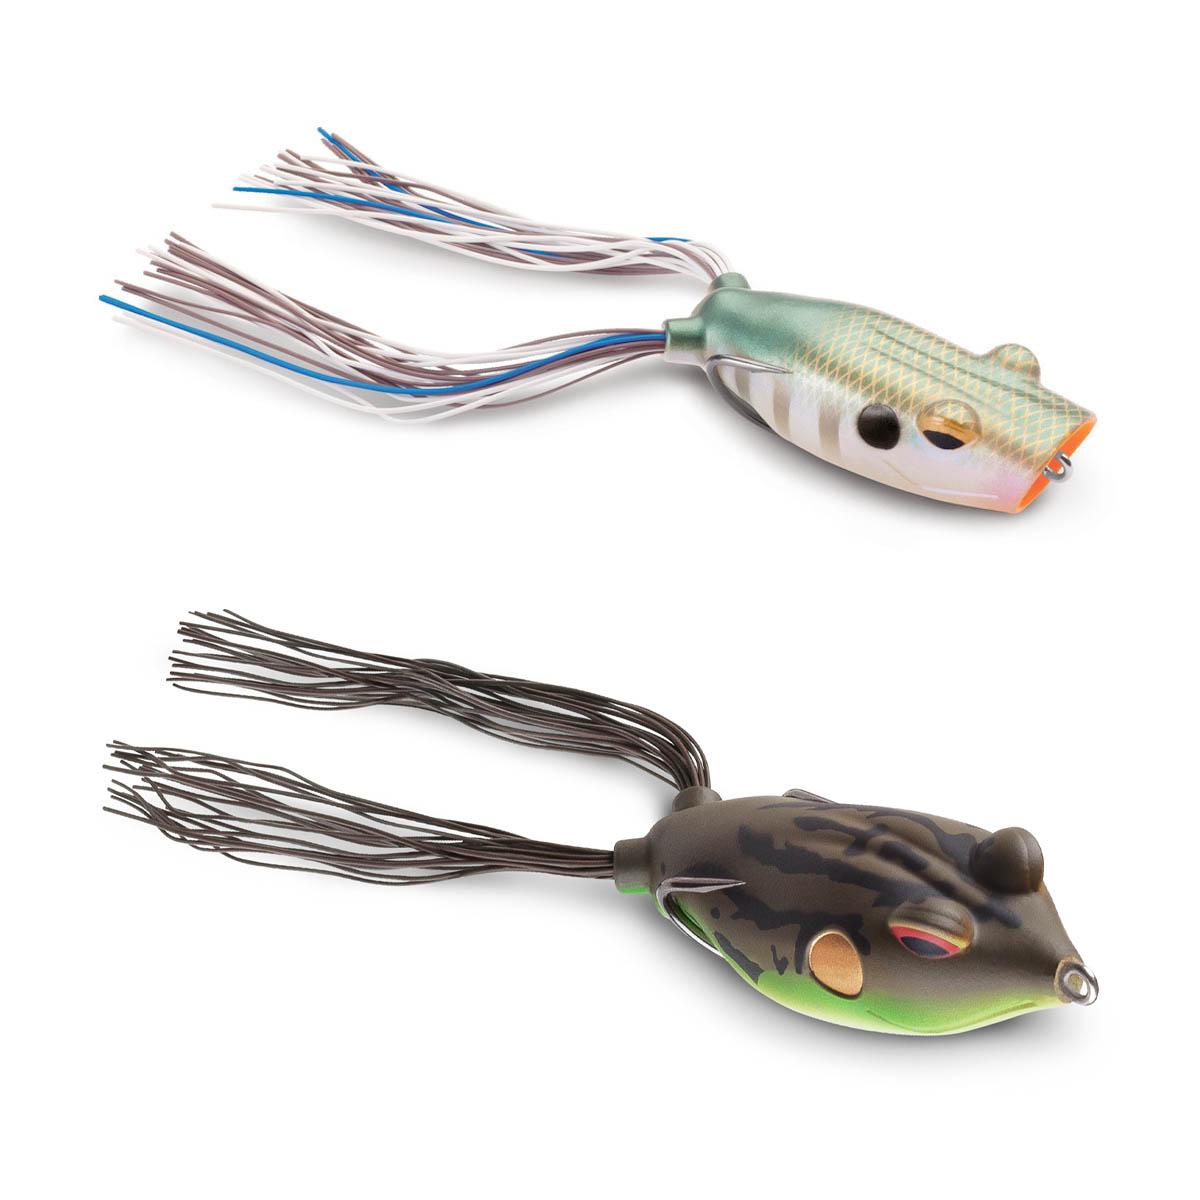 Hollow Body Frog Baits